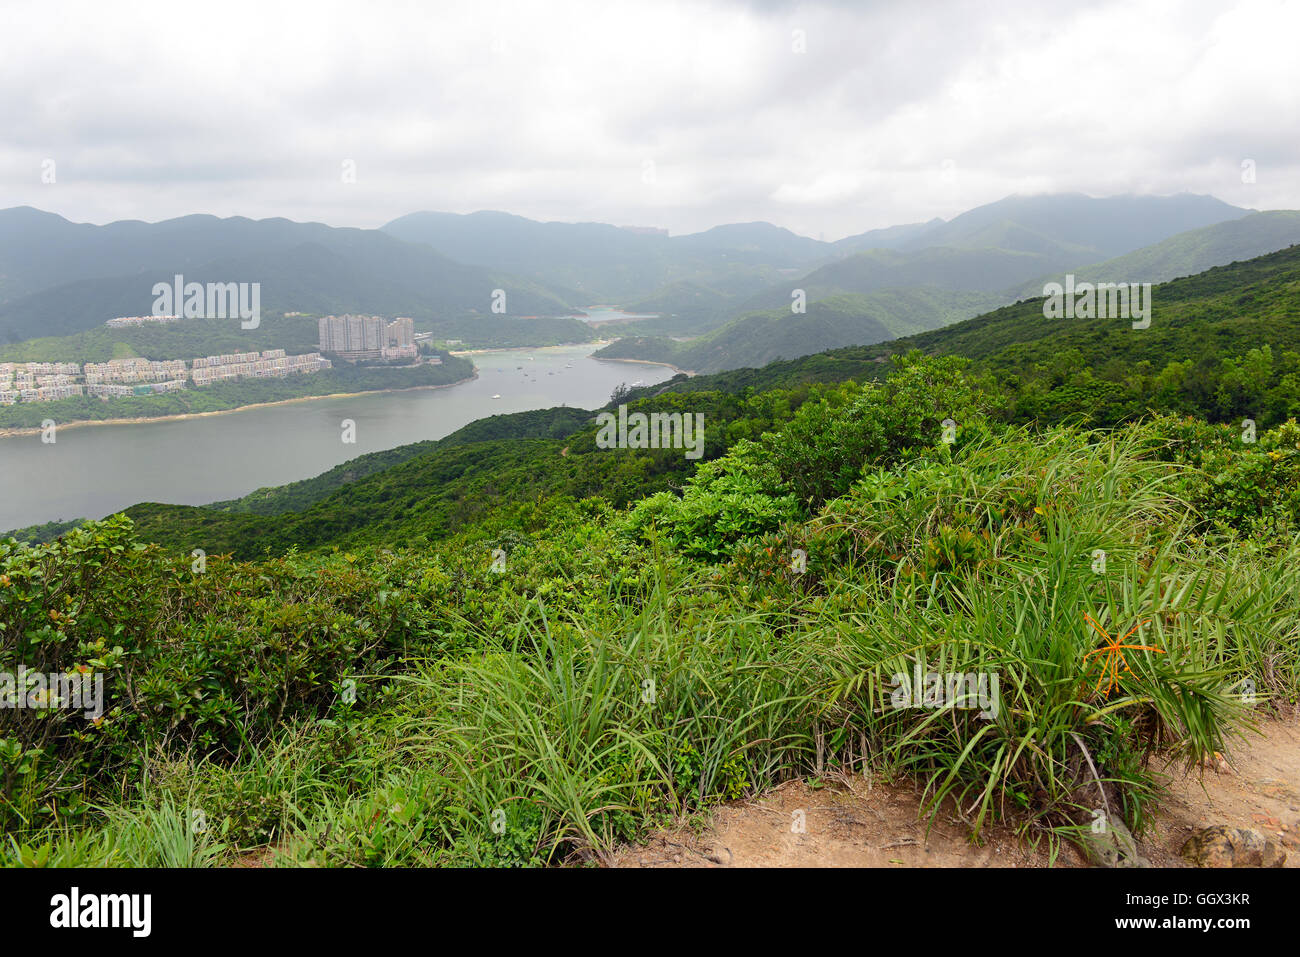 Green Tropical mountains and hiking route on the Dragon's Back trail near Hong Kong Stock Photo